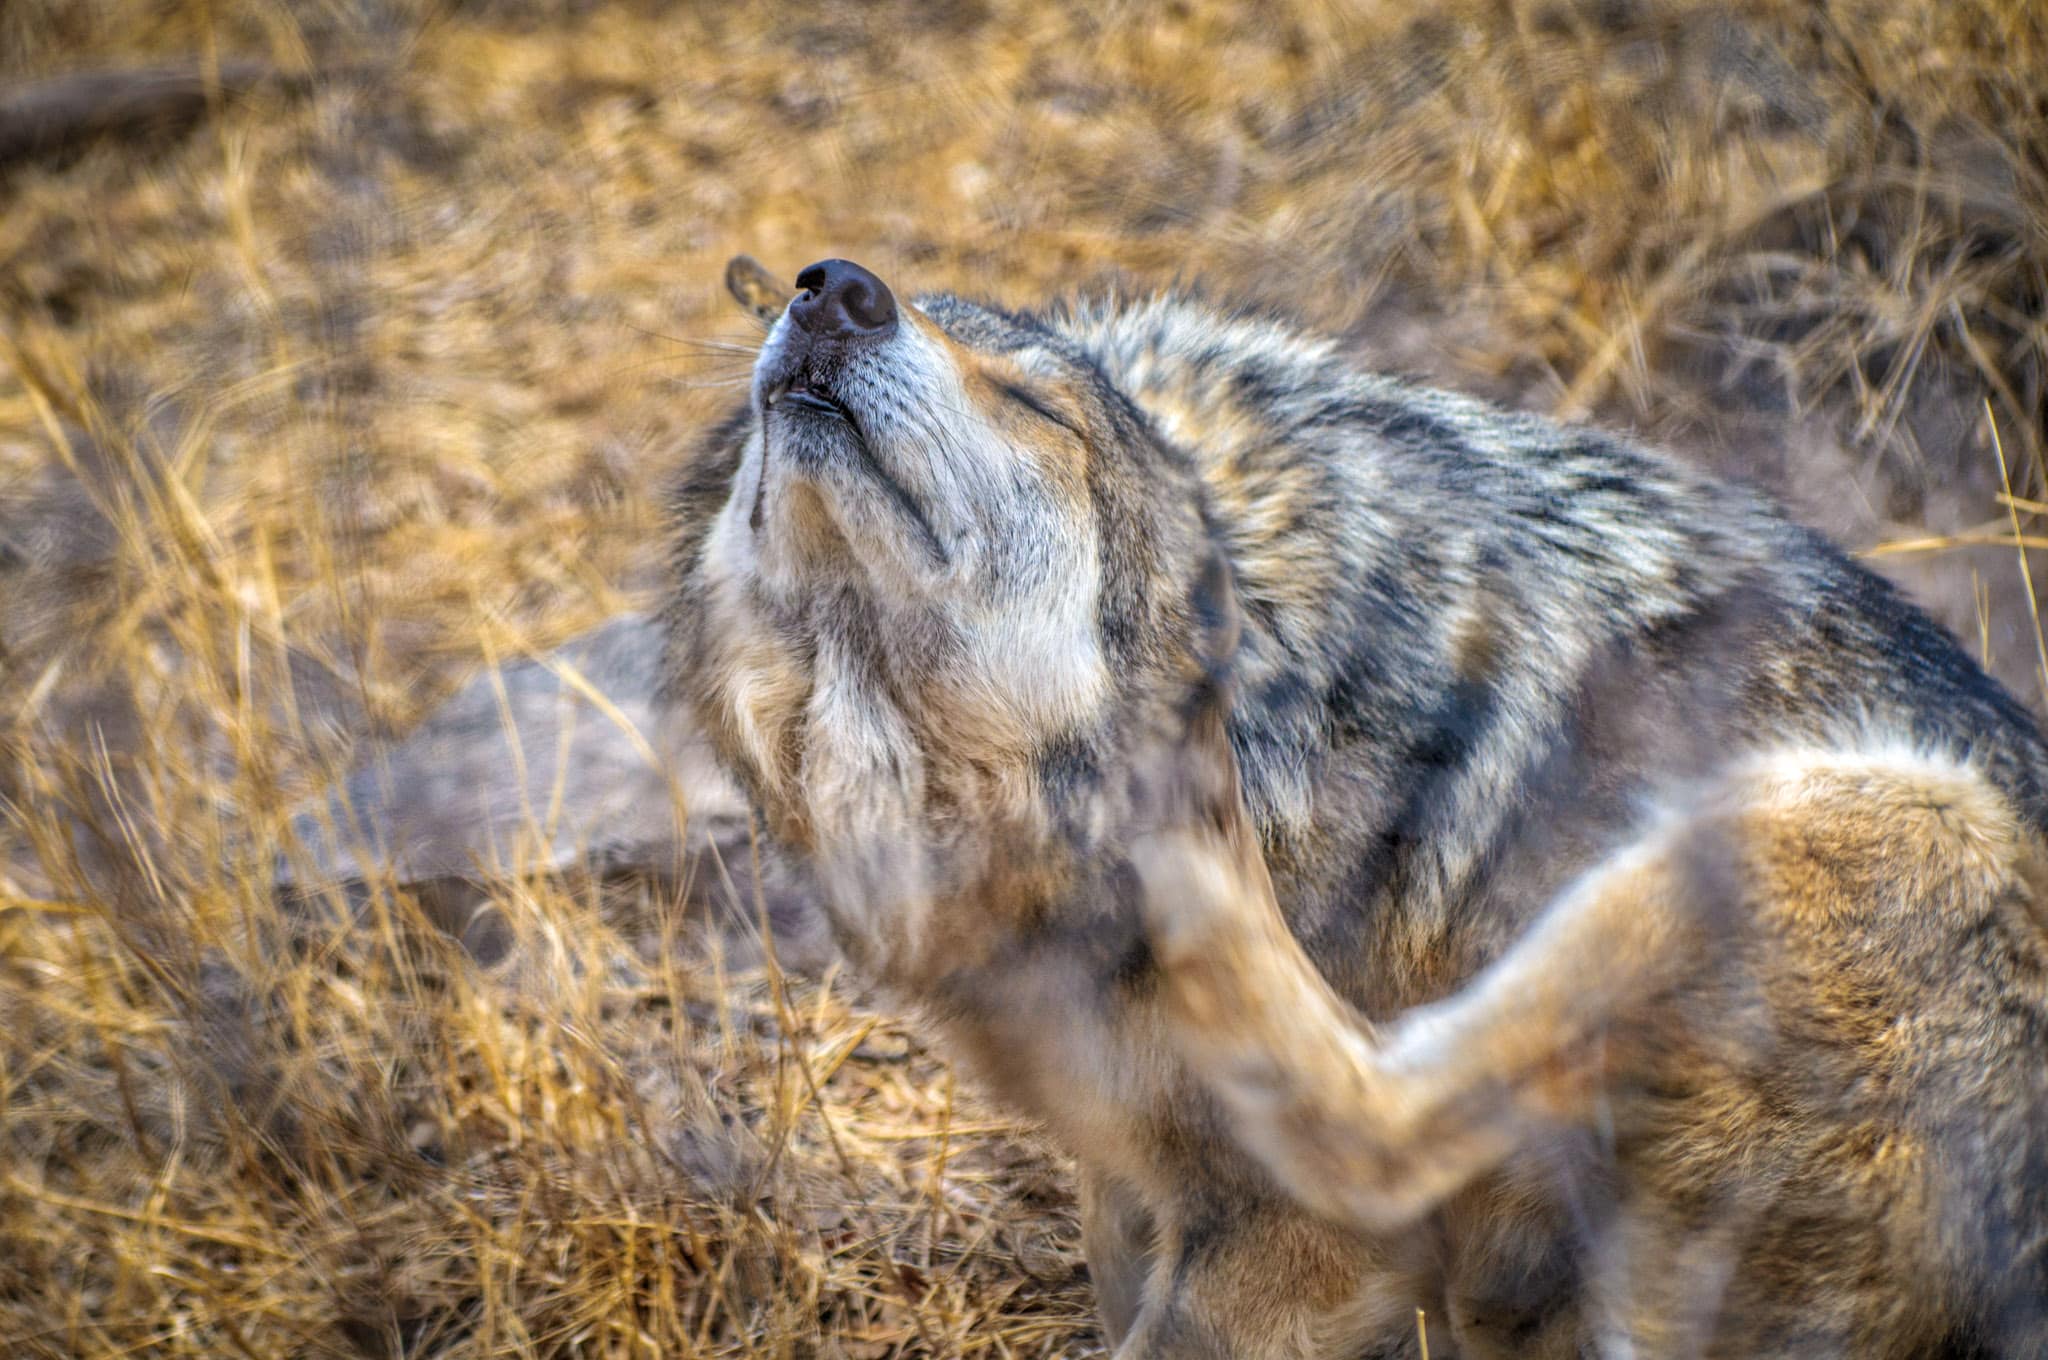 A Mexican Wold (Canis lupus baileyi) sratches his ear in the Living Desert Zoo and Gardens in Carlsbad, New Mexico.